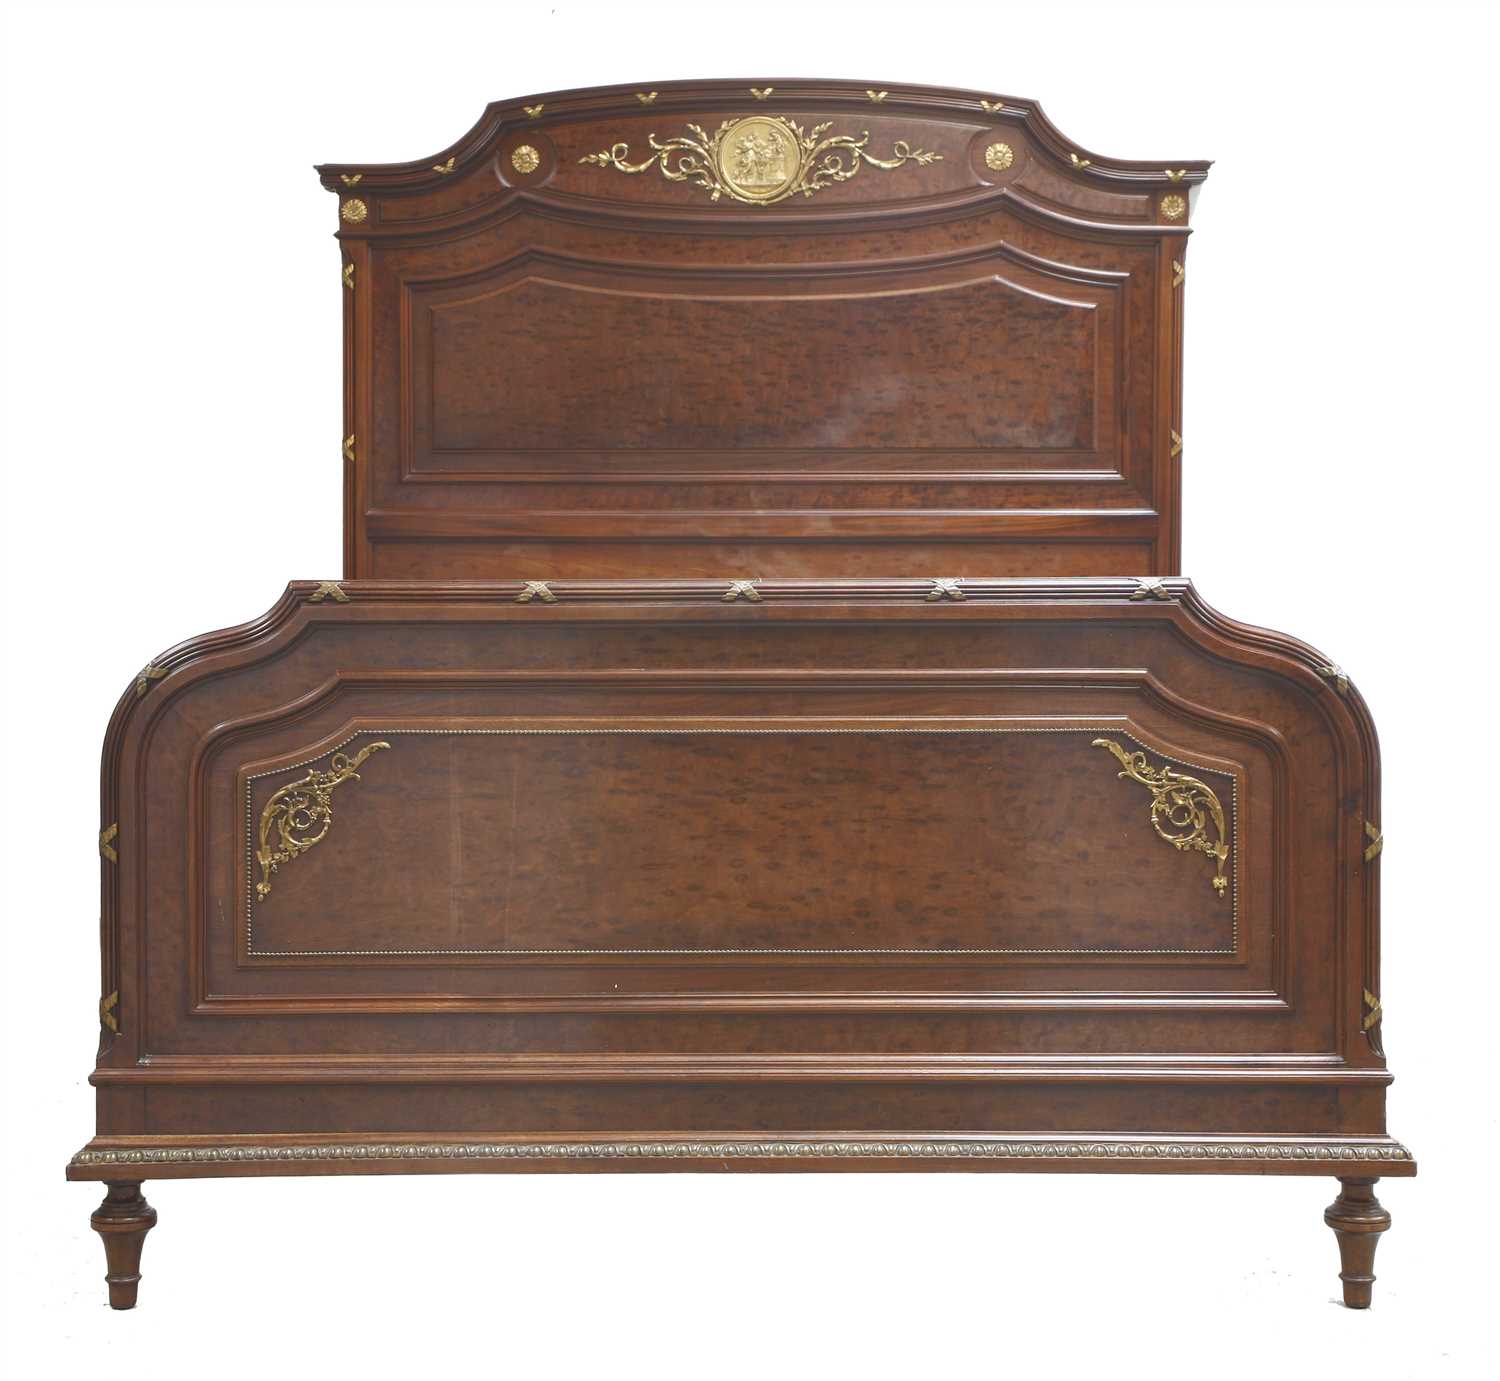 Lot 273 - A French plum pudding mahogany double bed